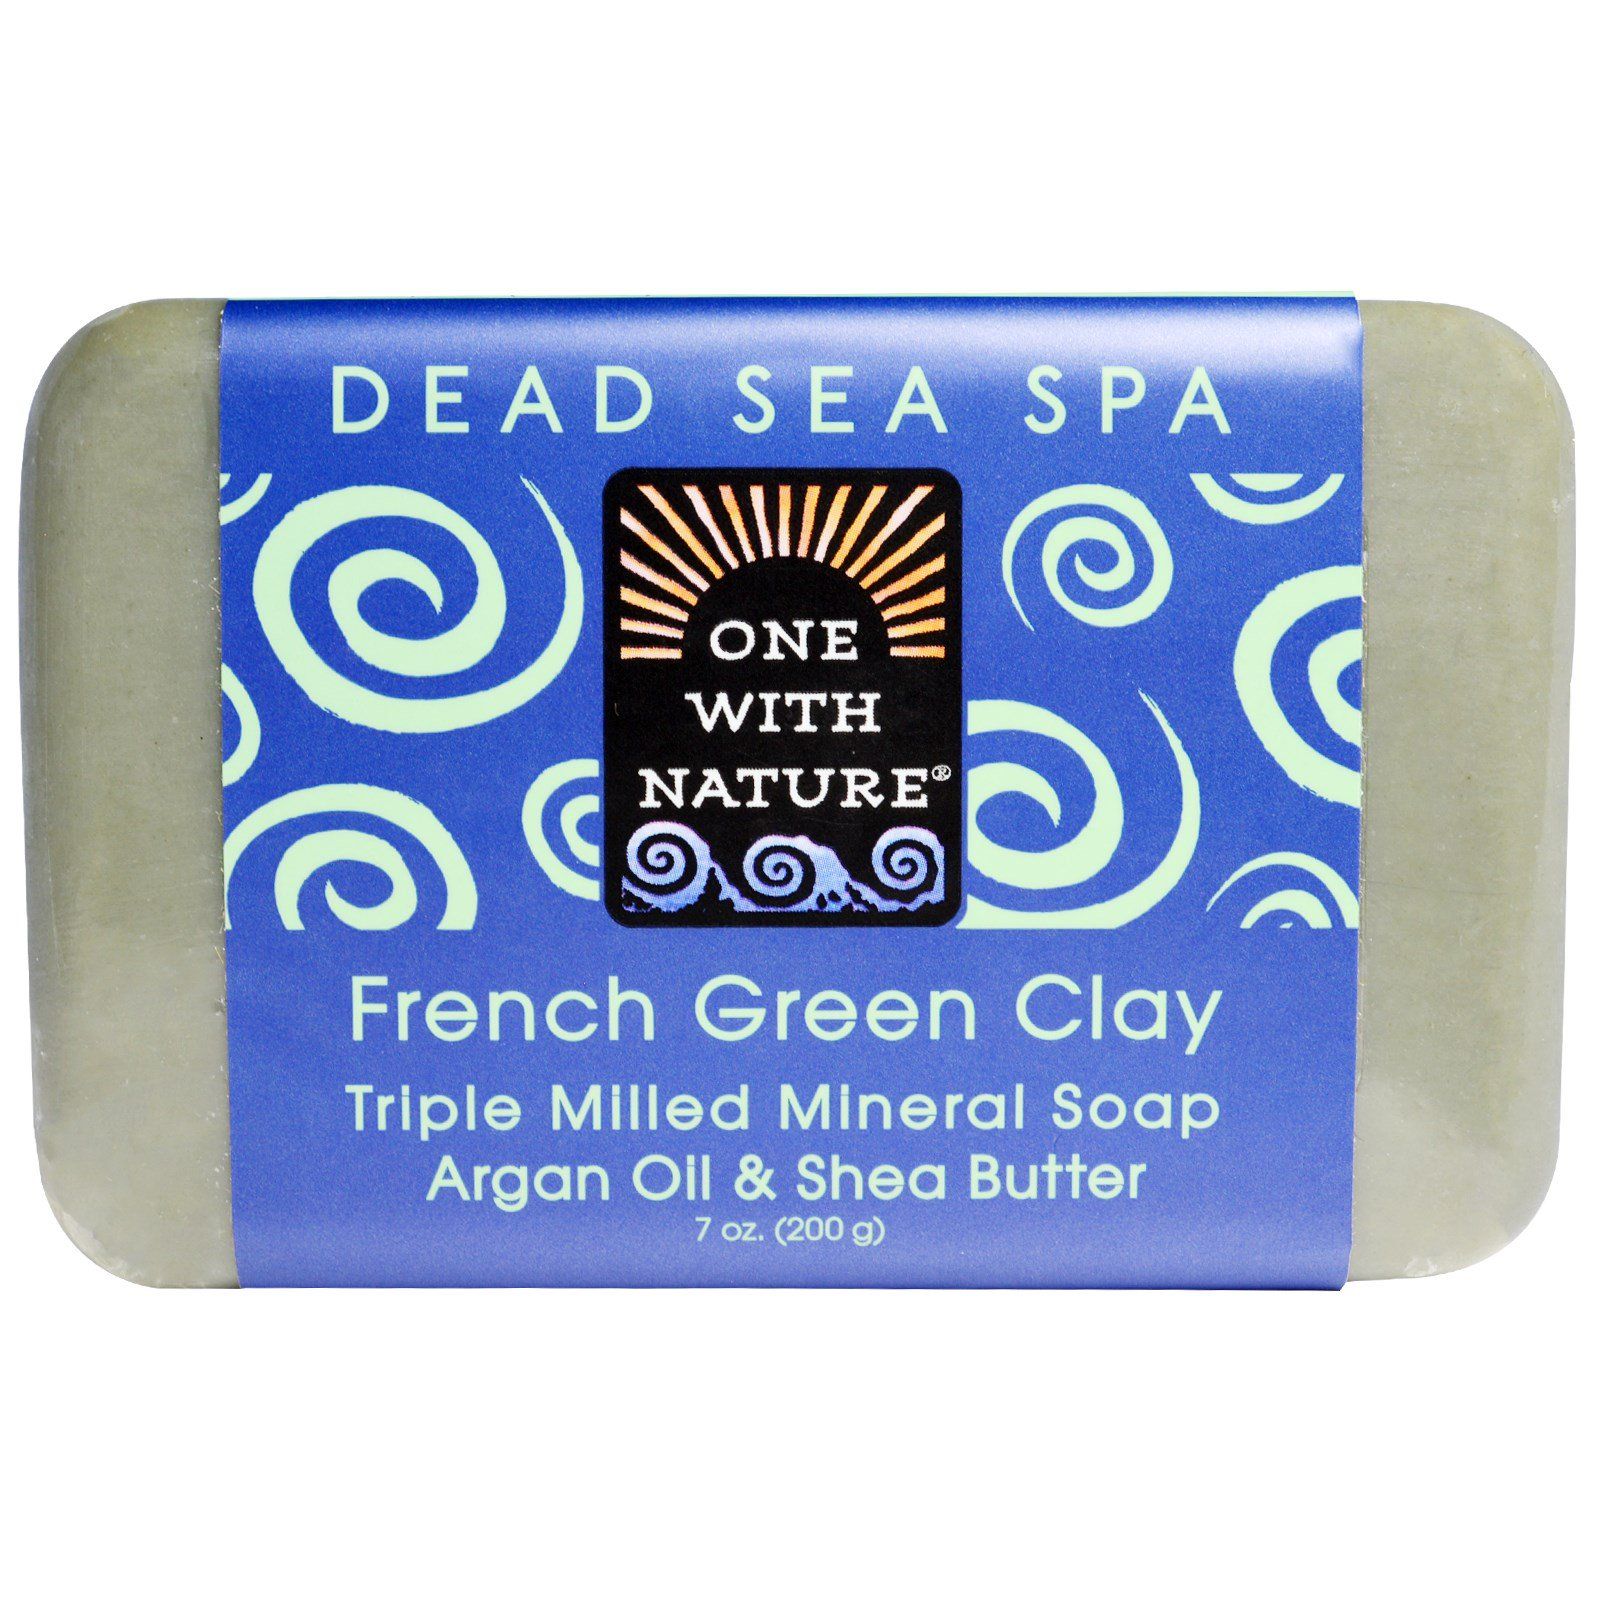 One with Nature Triple Milled Mineral Soap Bar French Green Clay 7 oz (200 g)